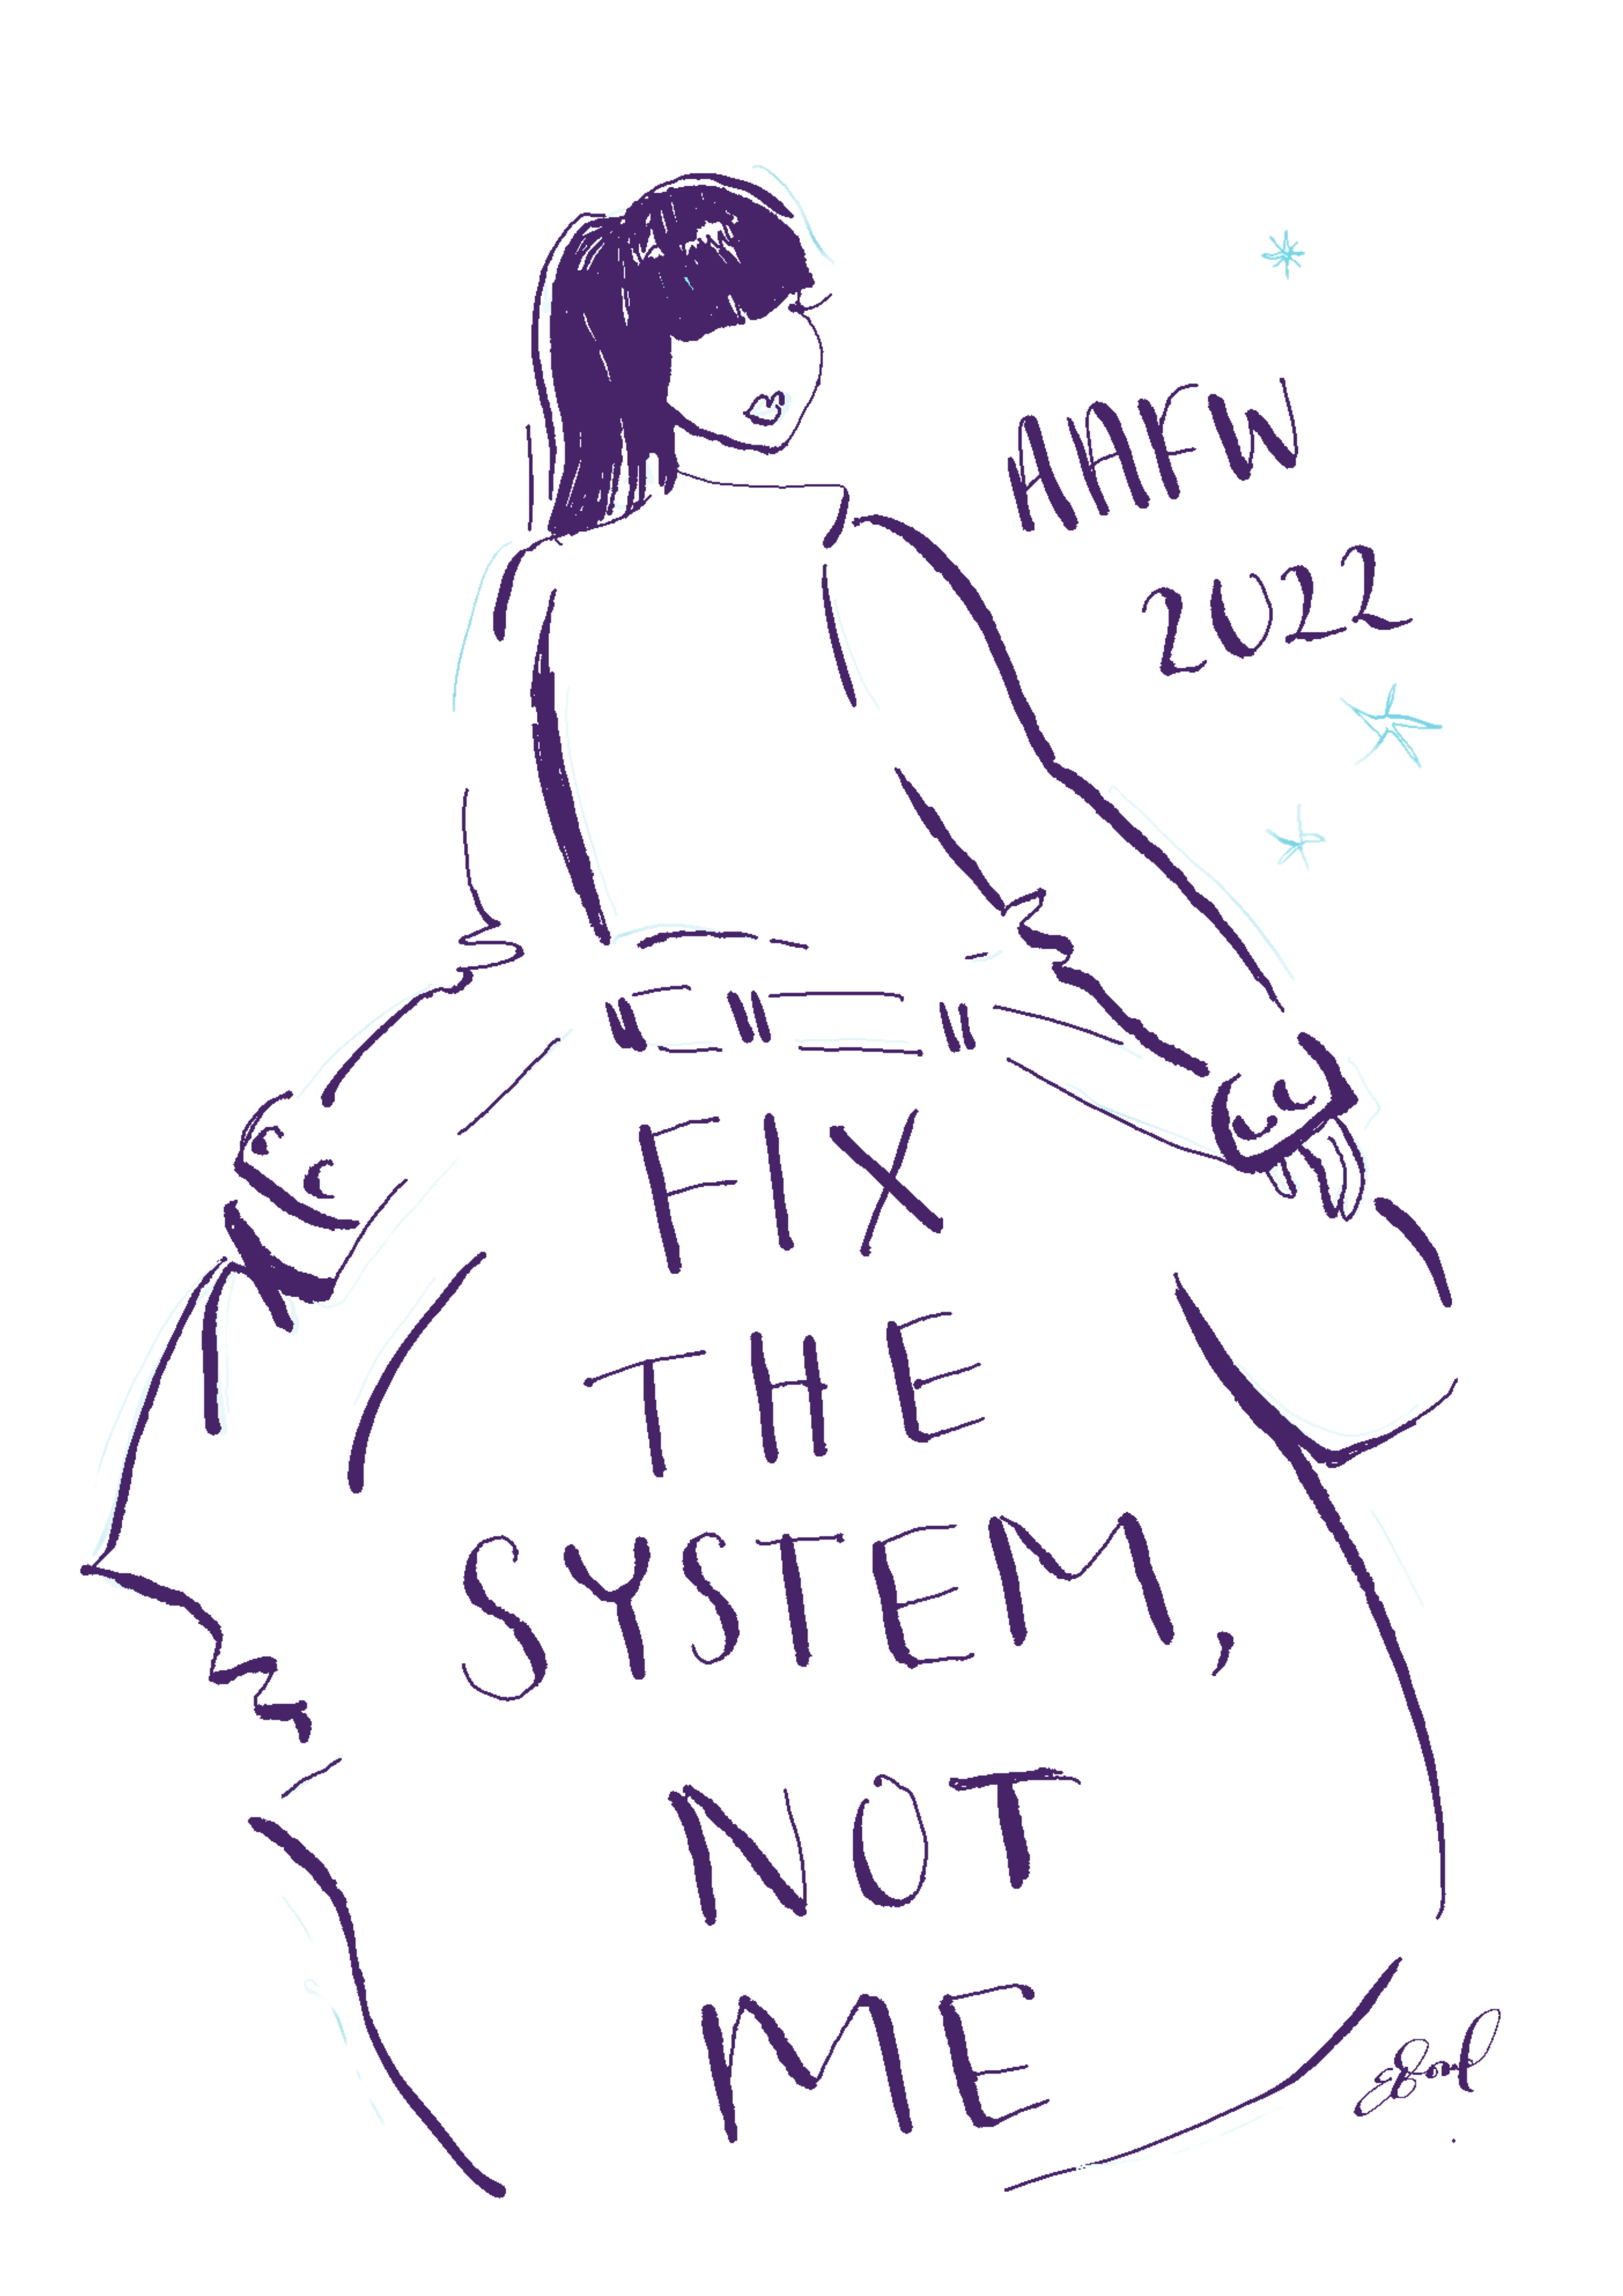 aafw-sketch-by-emma-bond.png